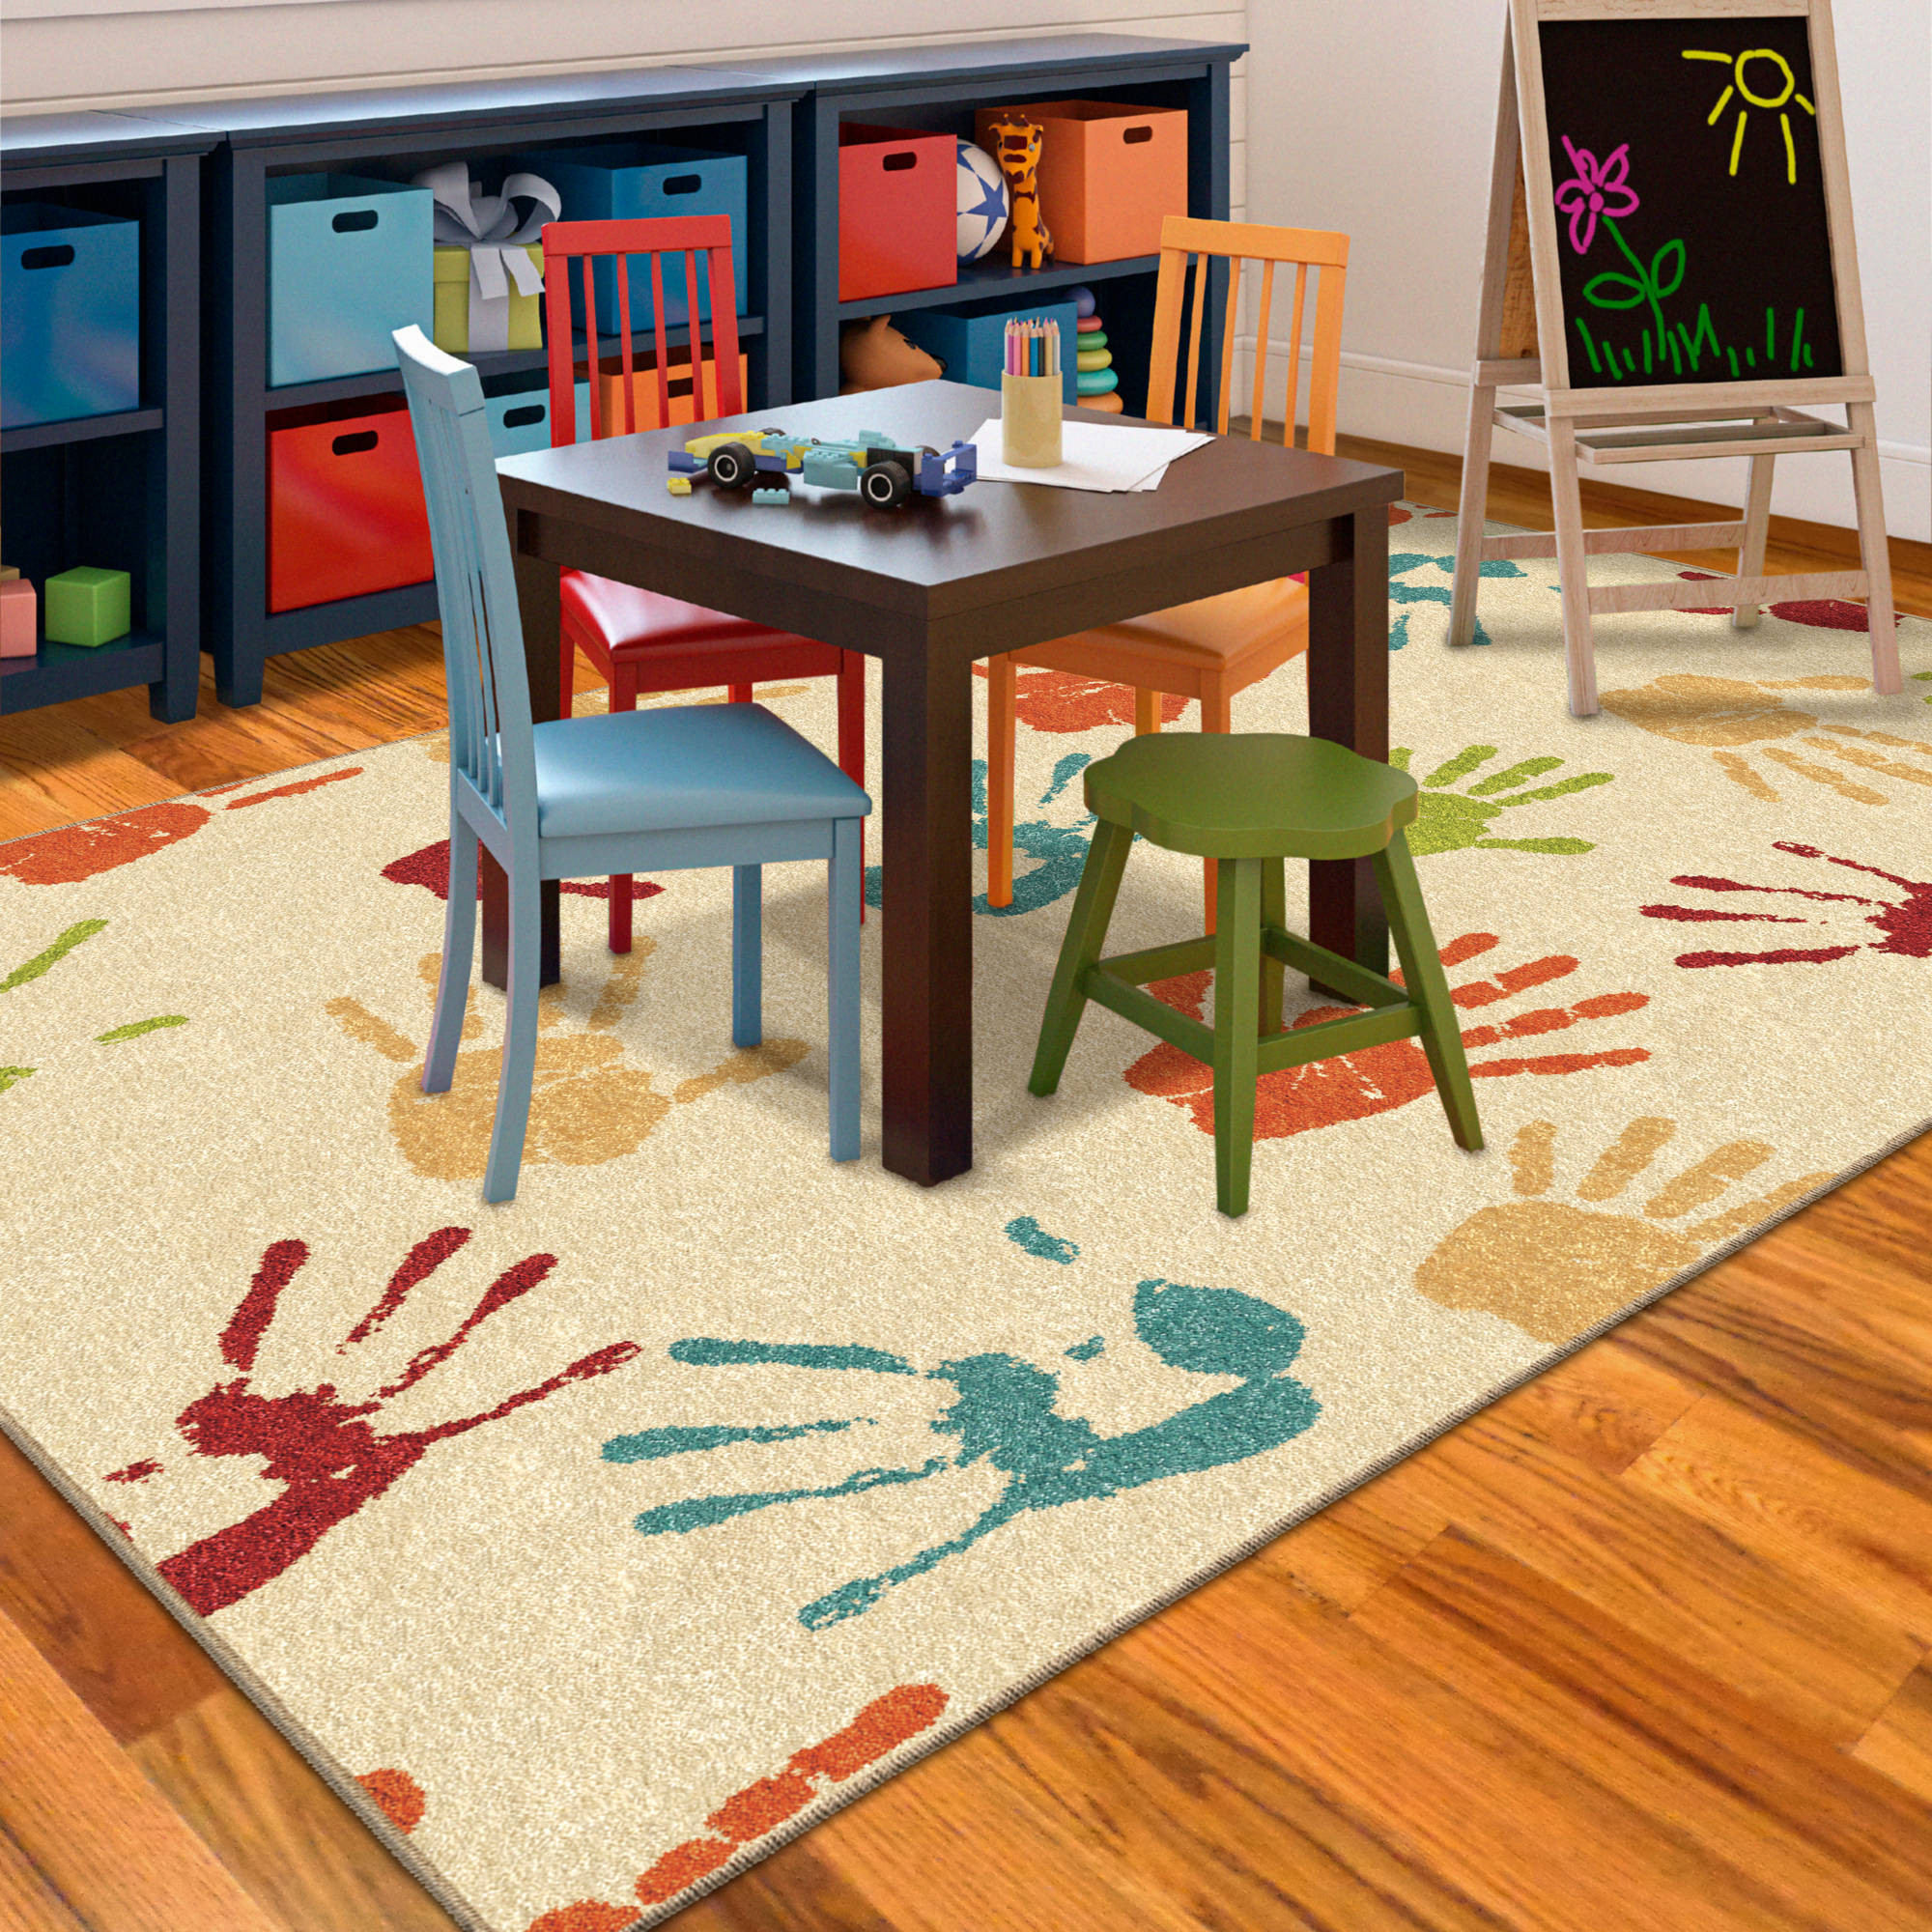 Best Rugs For Kids Room
 5 Things to Think About When Choosing Kids Playroom Rugs